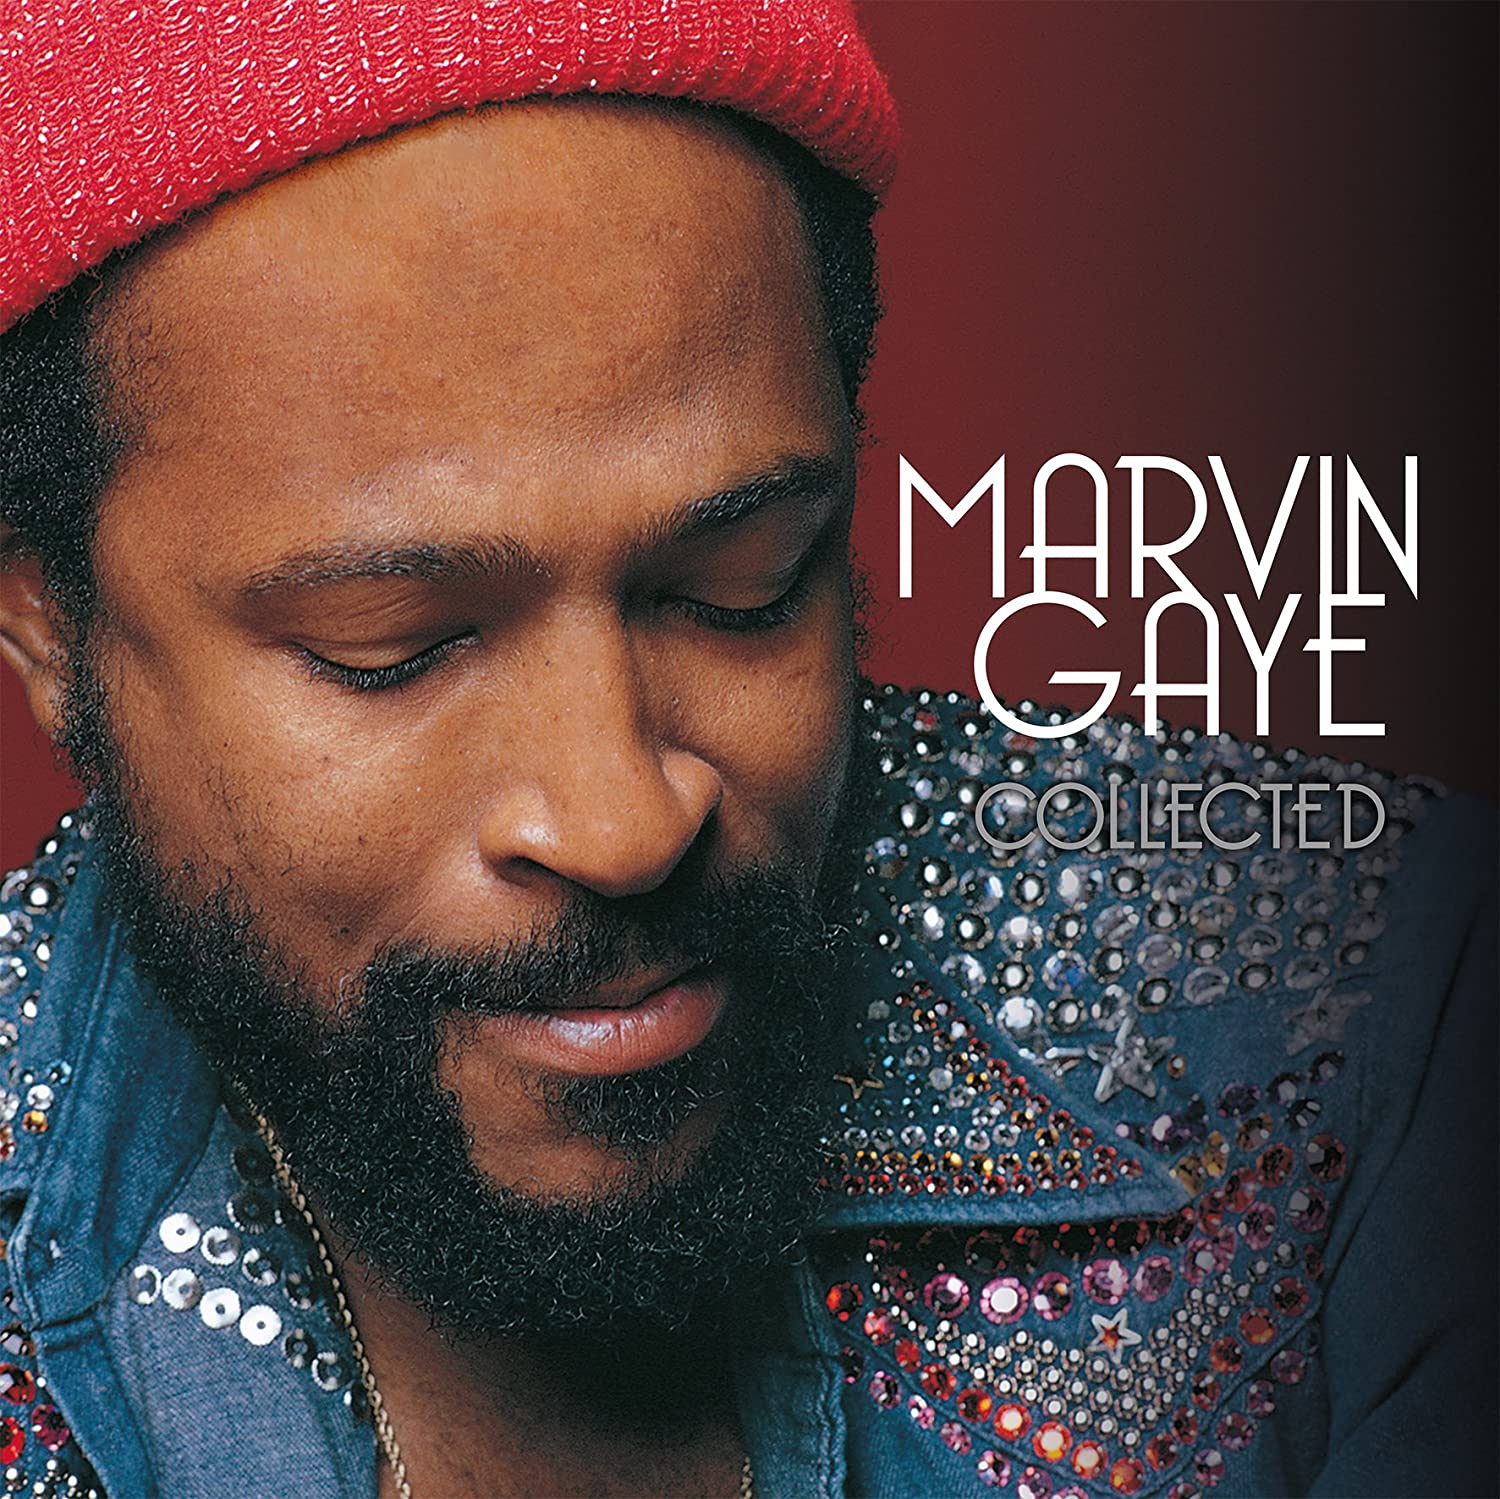 Marvin Gaye - Collected (2LP Gatefold Sleeve)